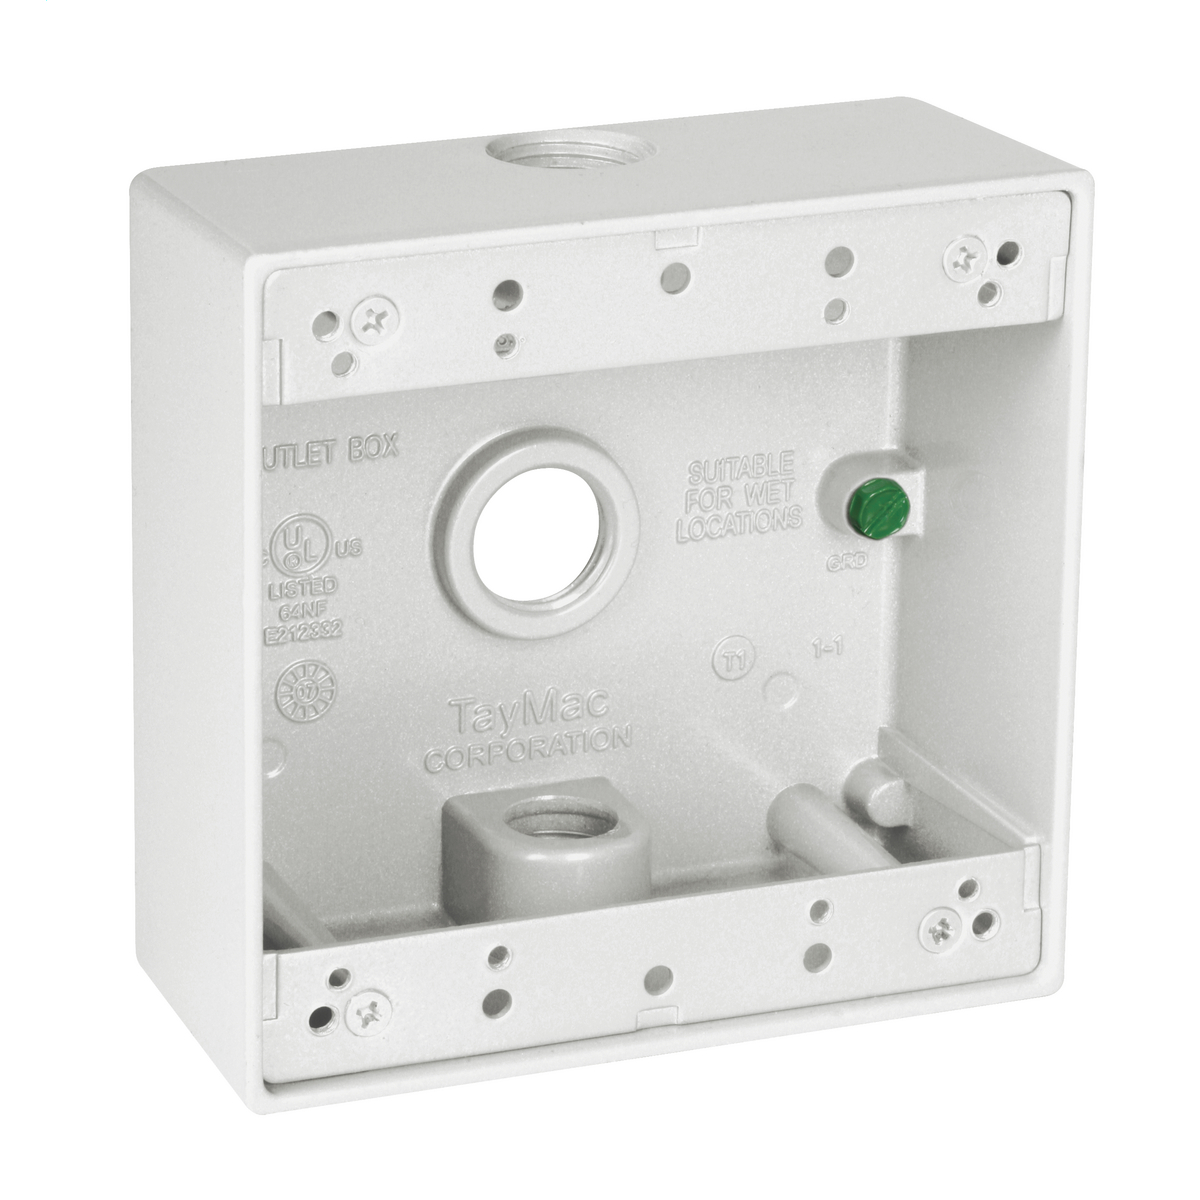 2G WP BOX (3) 1/2 IN. OUTLETS - WHITE